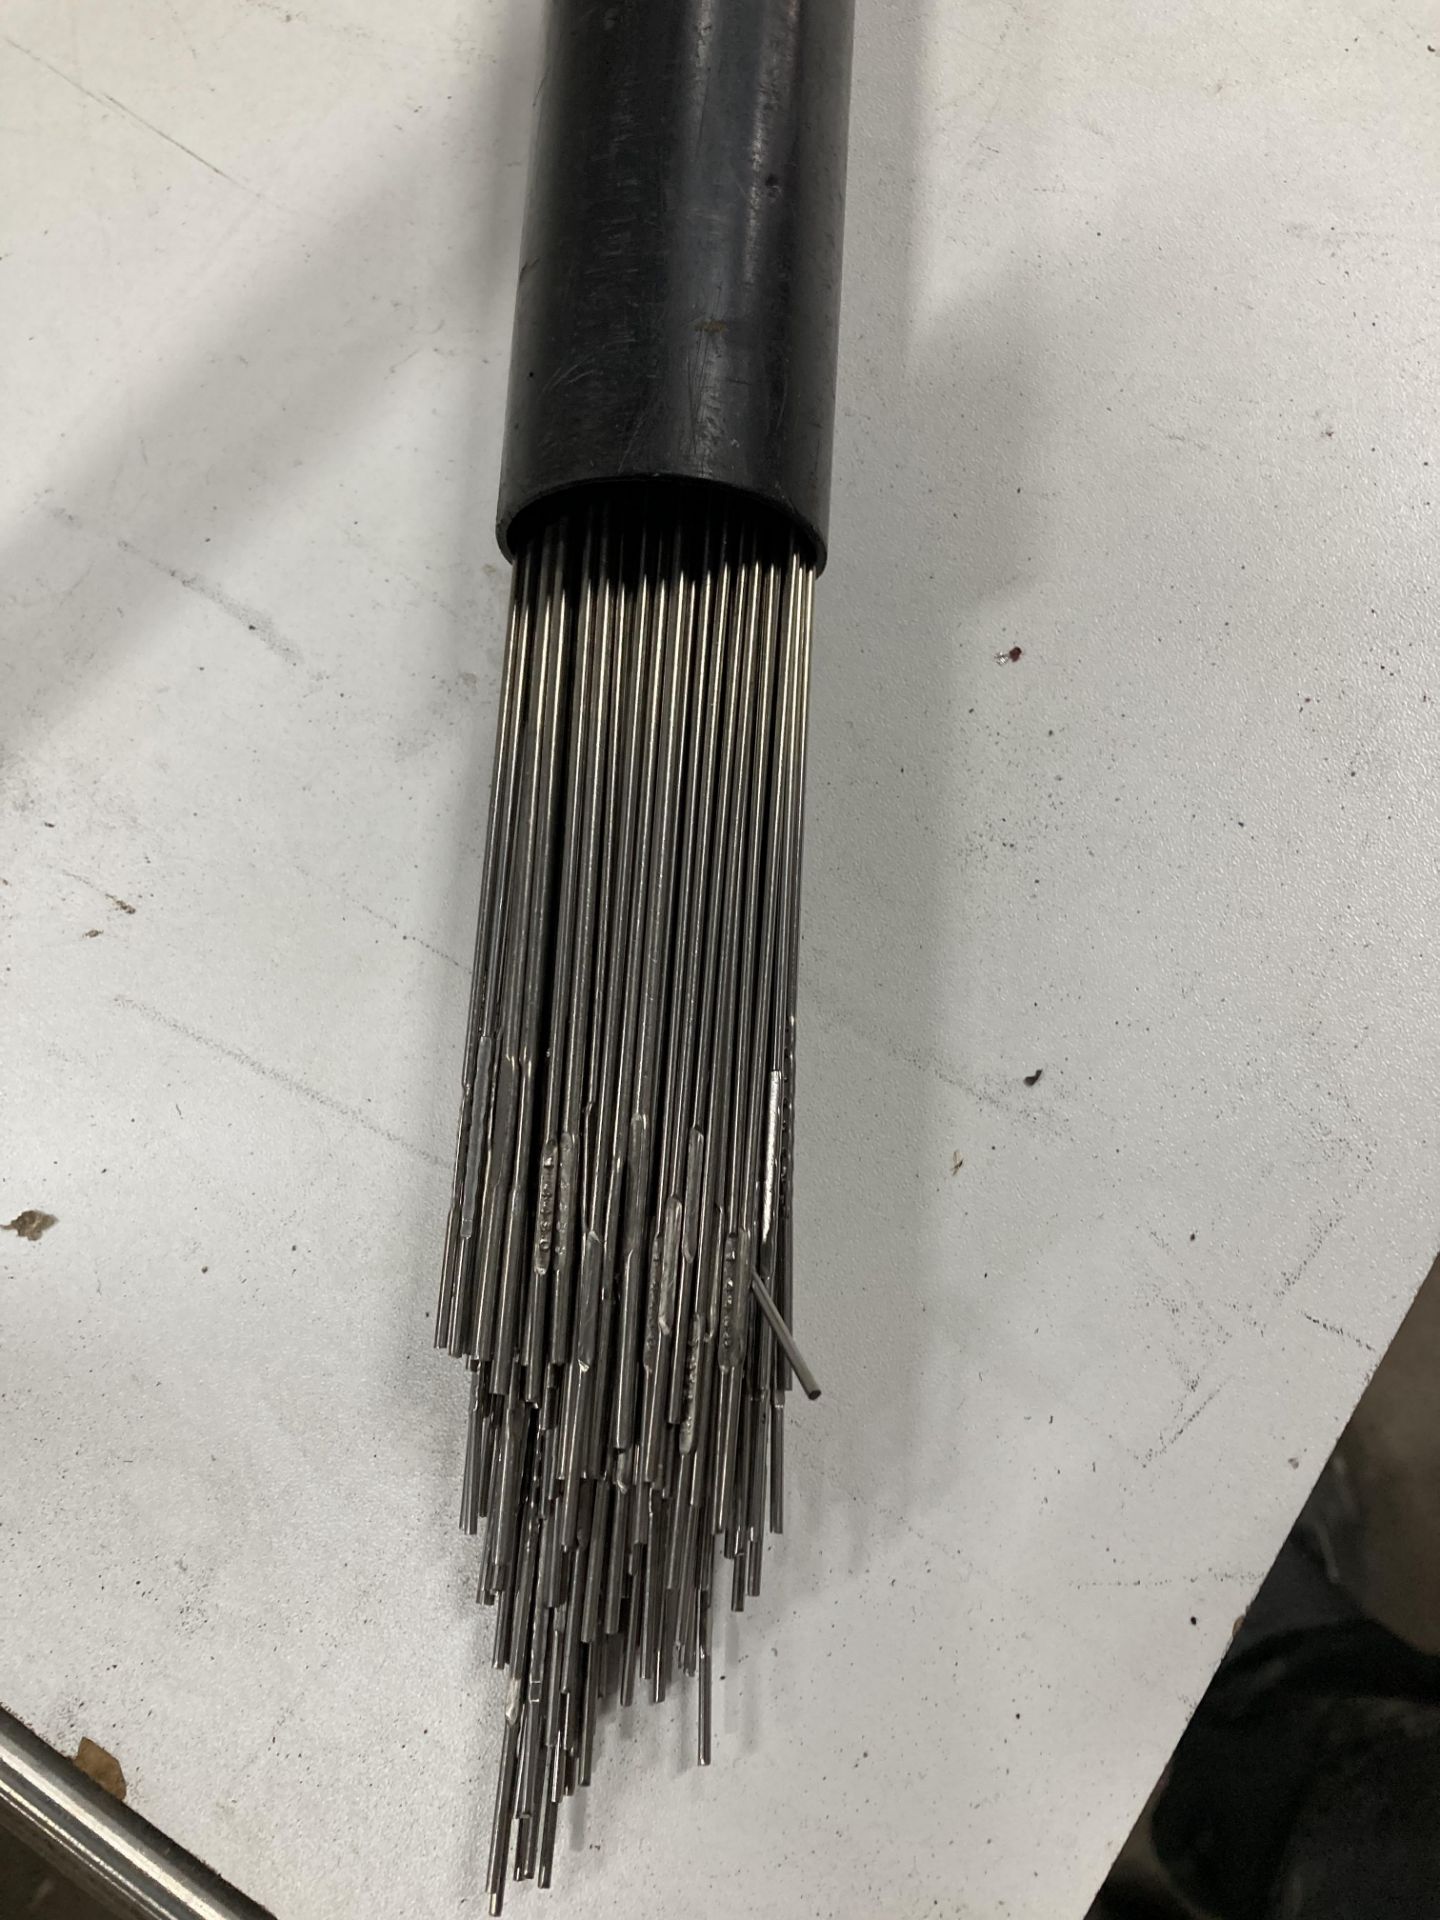 Pack of Unbranded Welding Electrodes - As per photos - Image 3 of 3